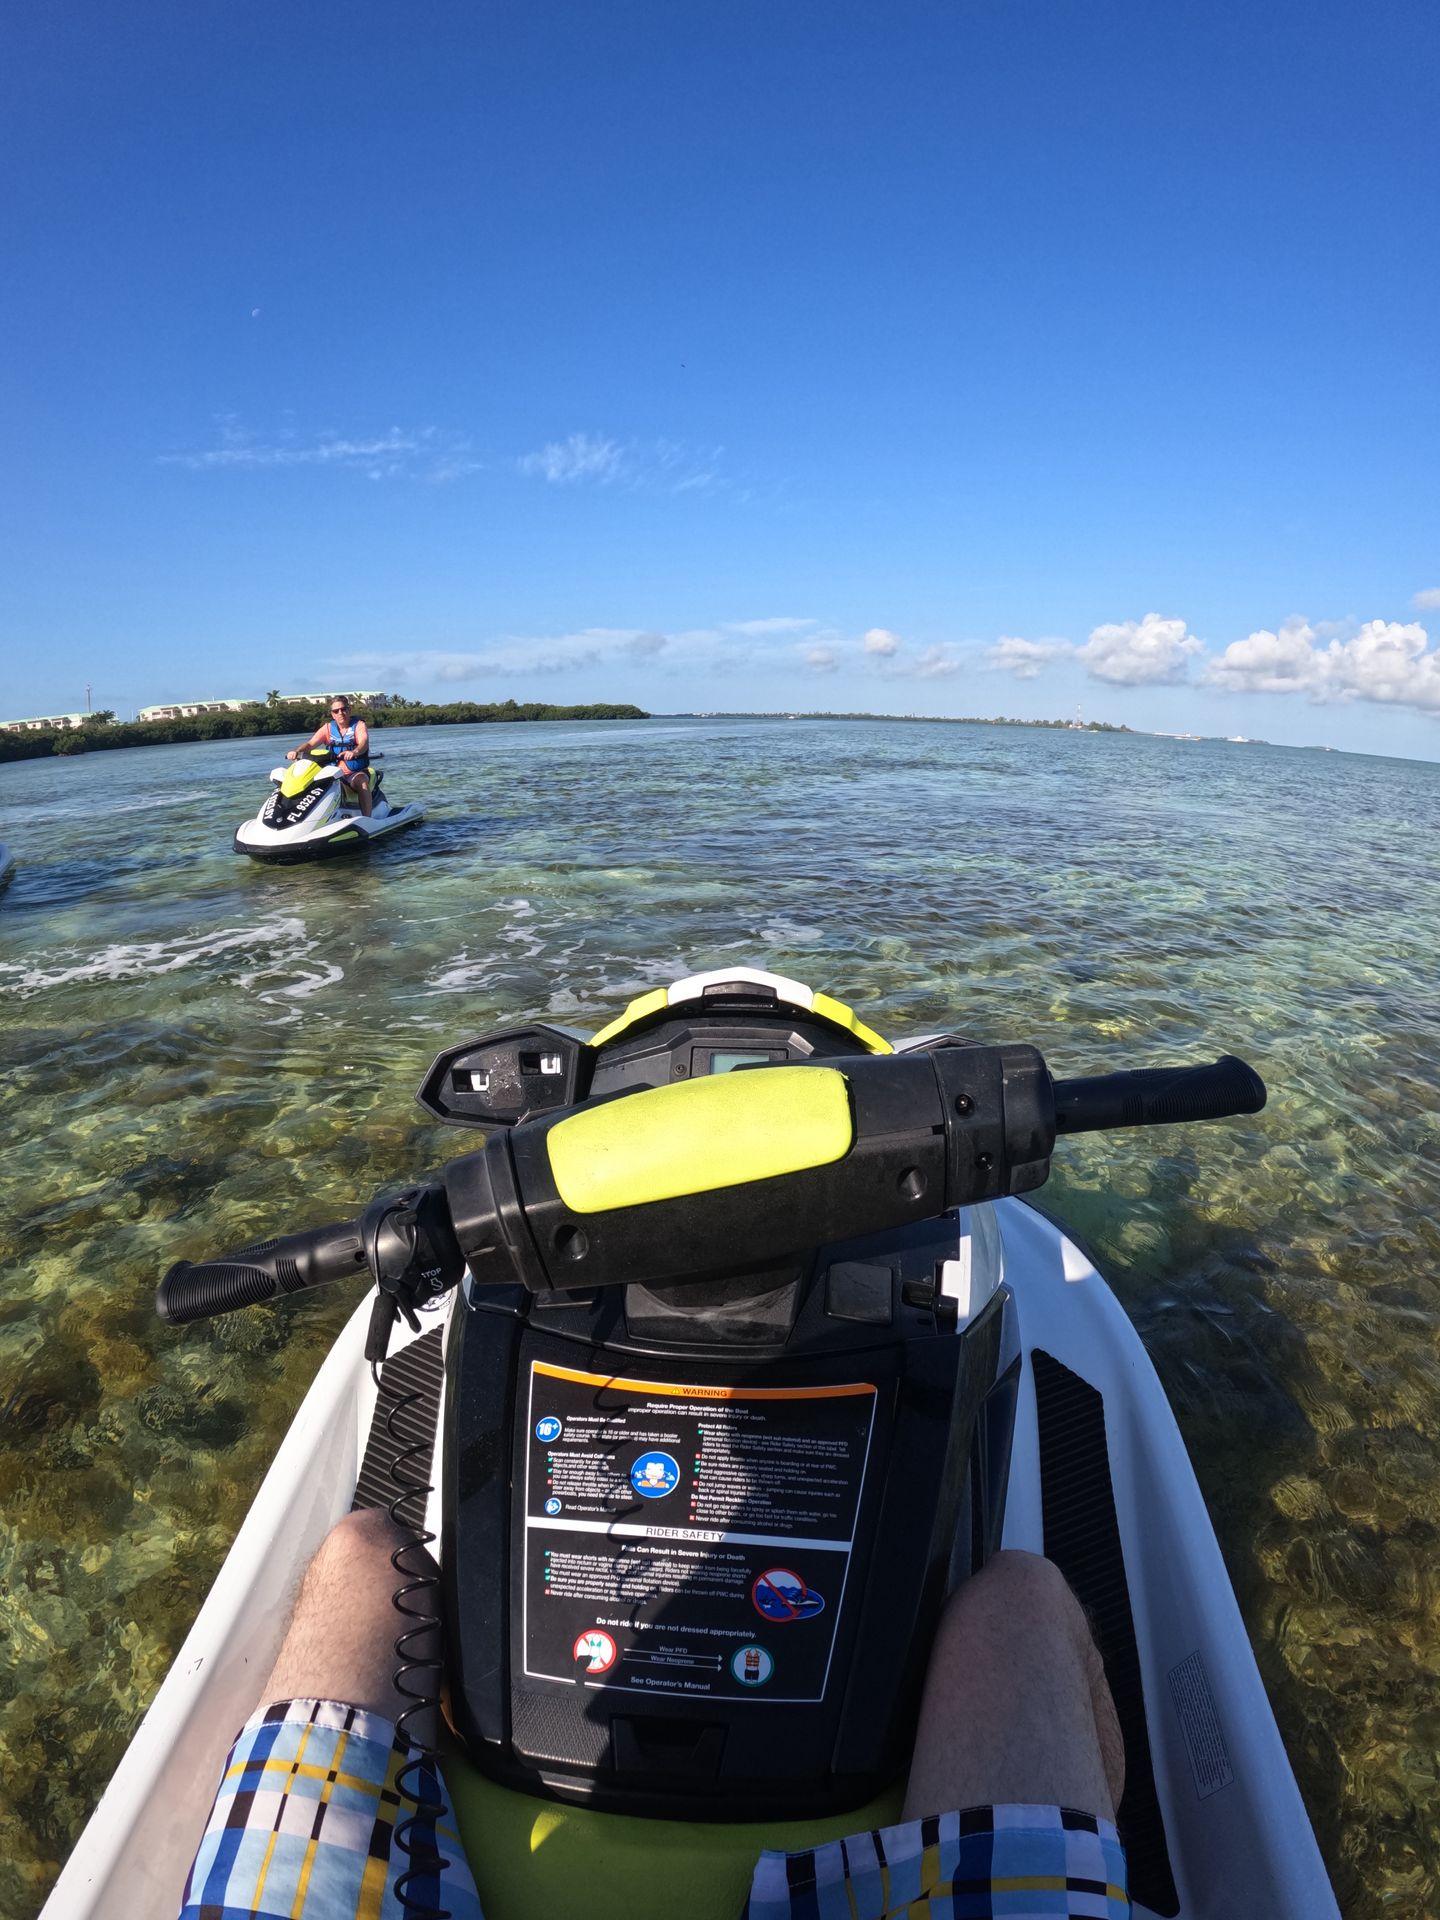 Looking out at the front of a jetski with the ocean in the background.